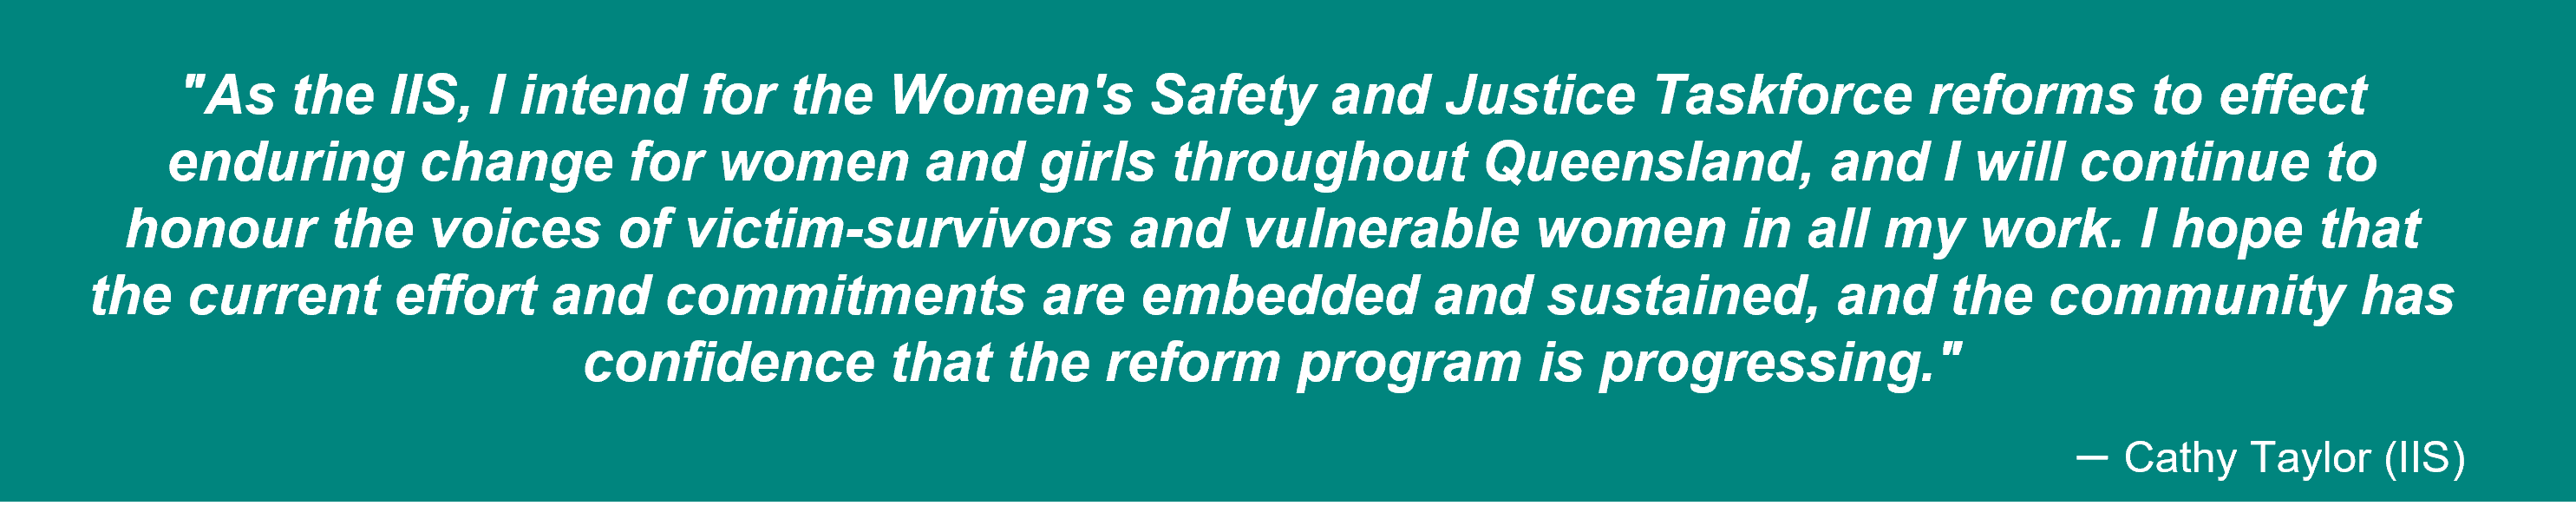 Quote by Cathy Taylor (IIS): As IIS, I intend for the reforms to effect enduring change for women and girls throughout Queensland, and I will continue to honour the voices of victim-survivors and vulnerable women in all my work. I hope that the current effort and commitments are embedded and sustained, and the community has confidence that the reform program is progressing.